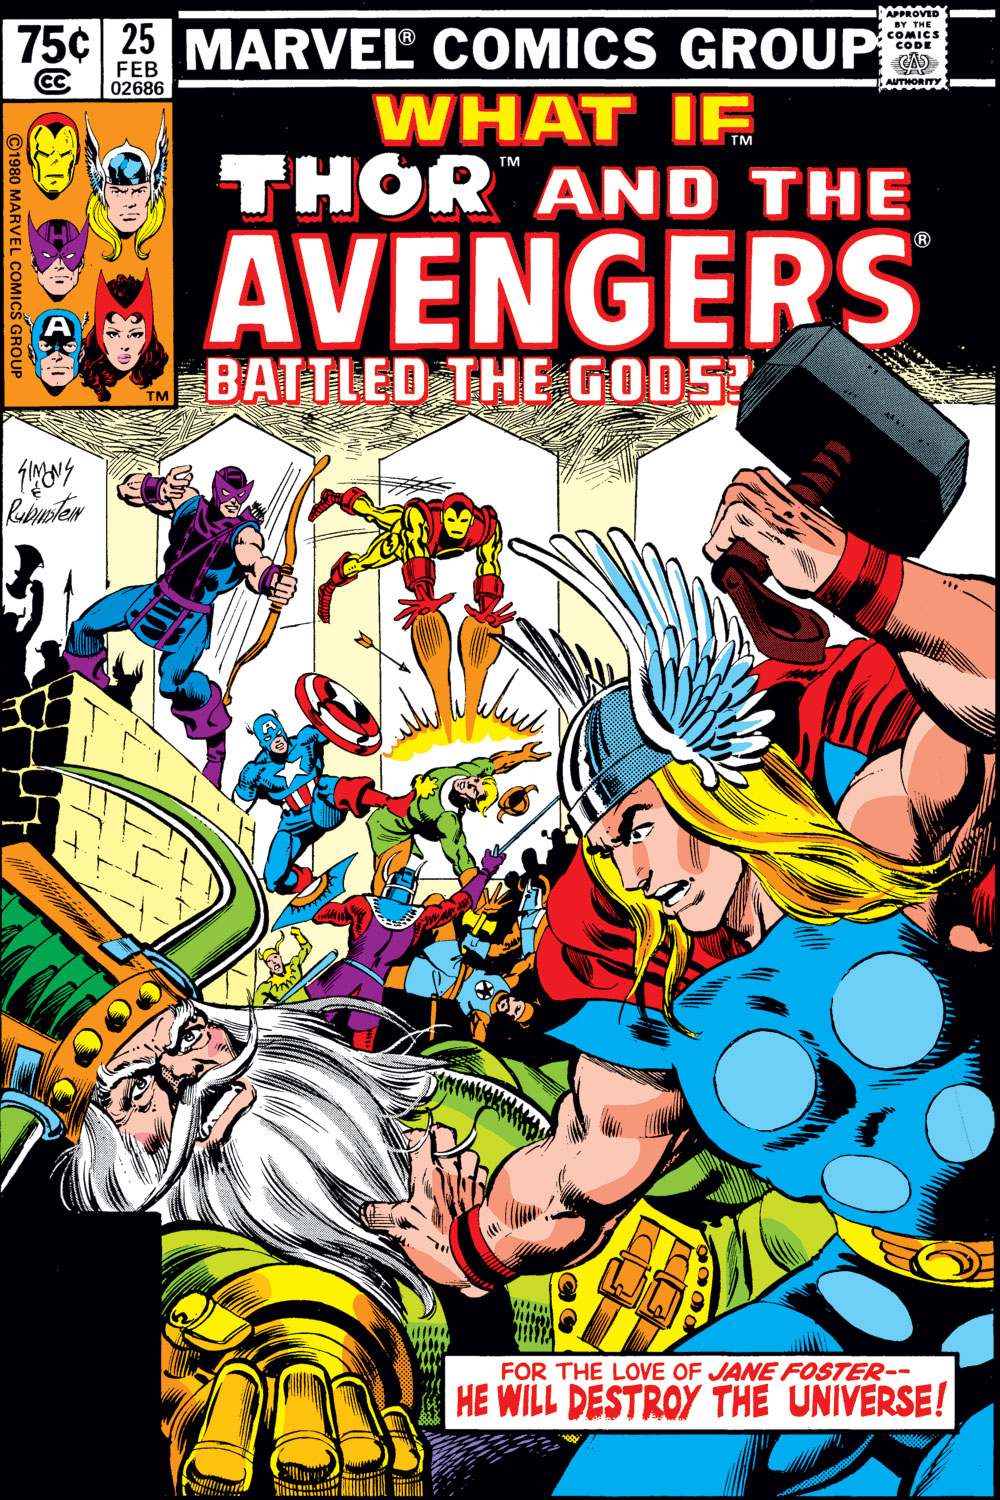 <{ $series->title }} issue 25 - Thor and the Avengers battled the gods - Page 1